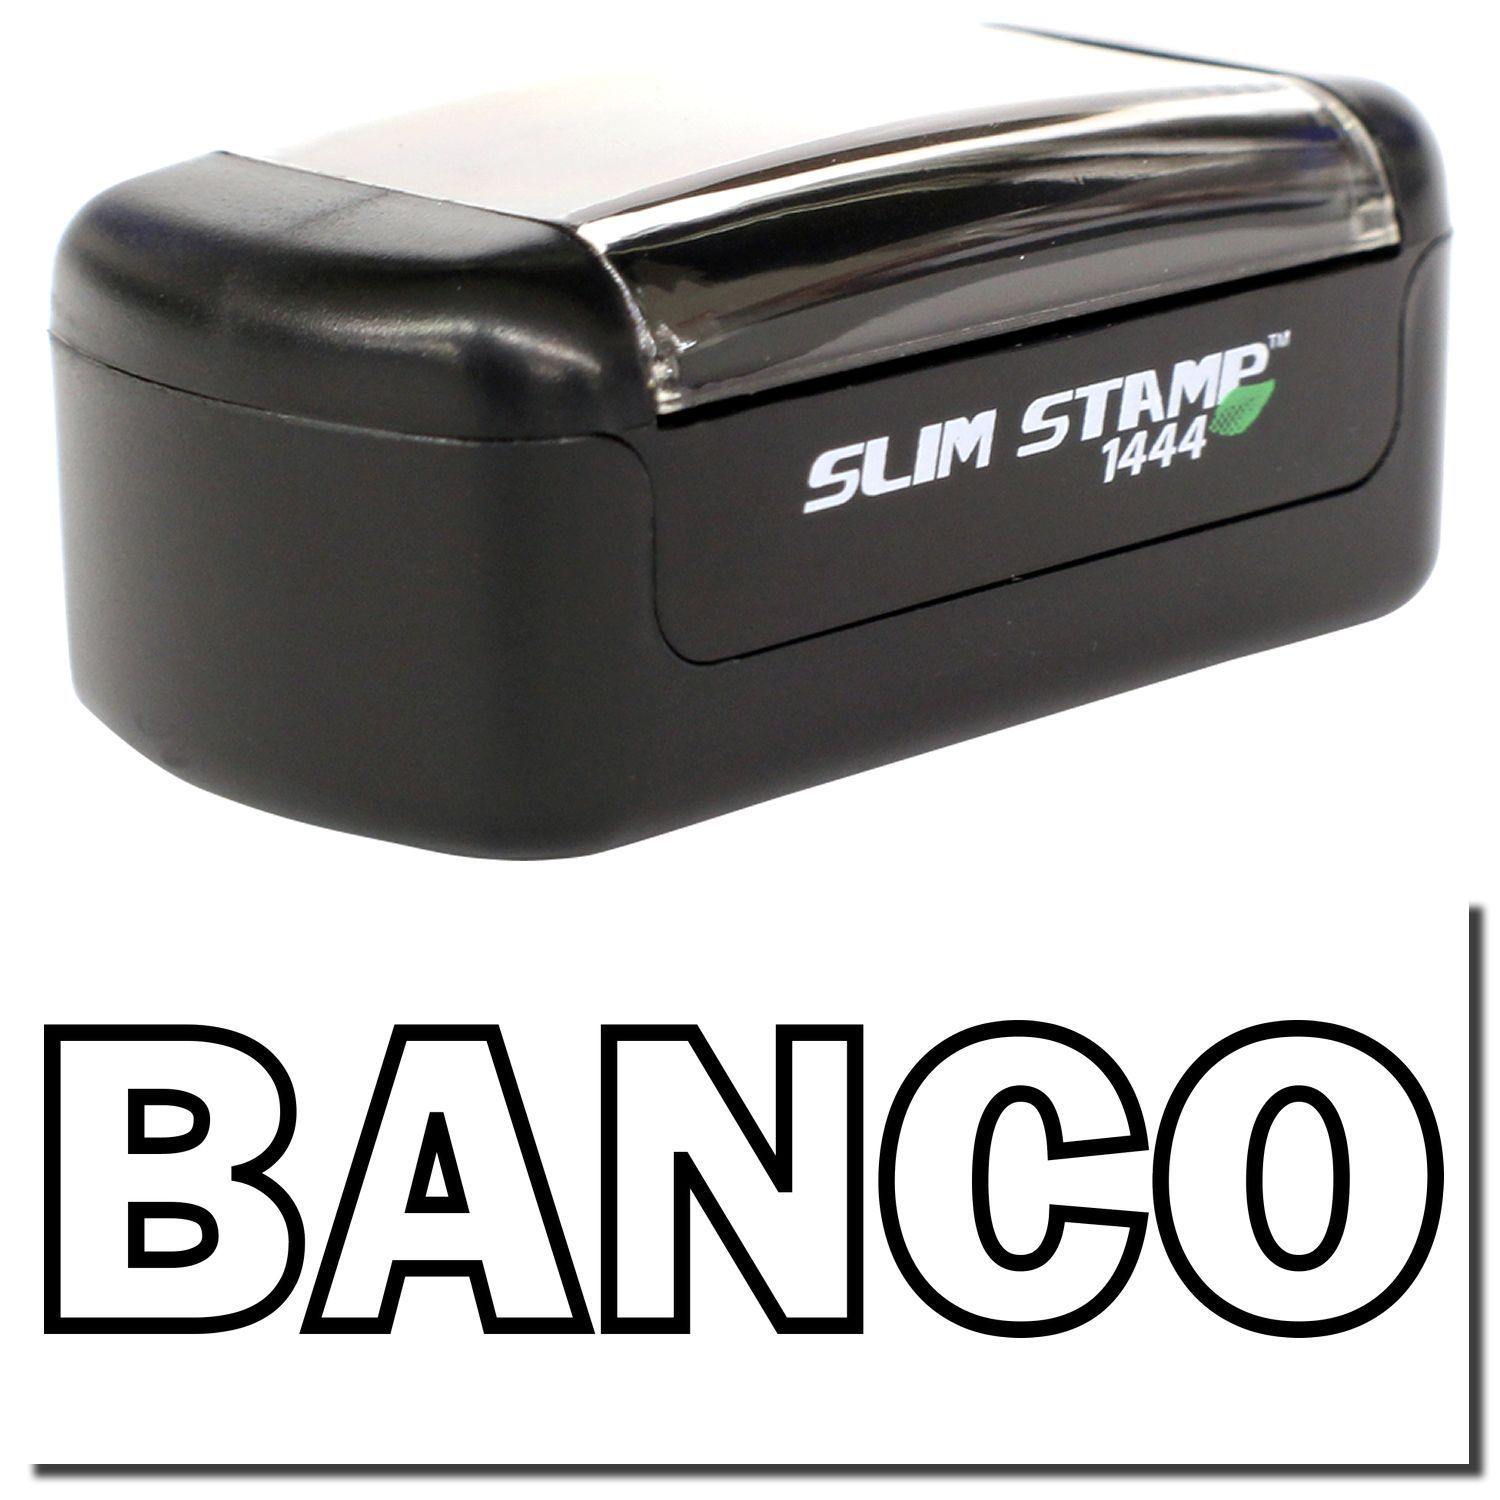 A stock office pre-inked stamp with a stamped image showing how the text "BANCO" in an outline font is displayed after stamping.